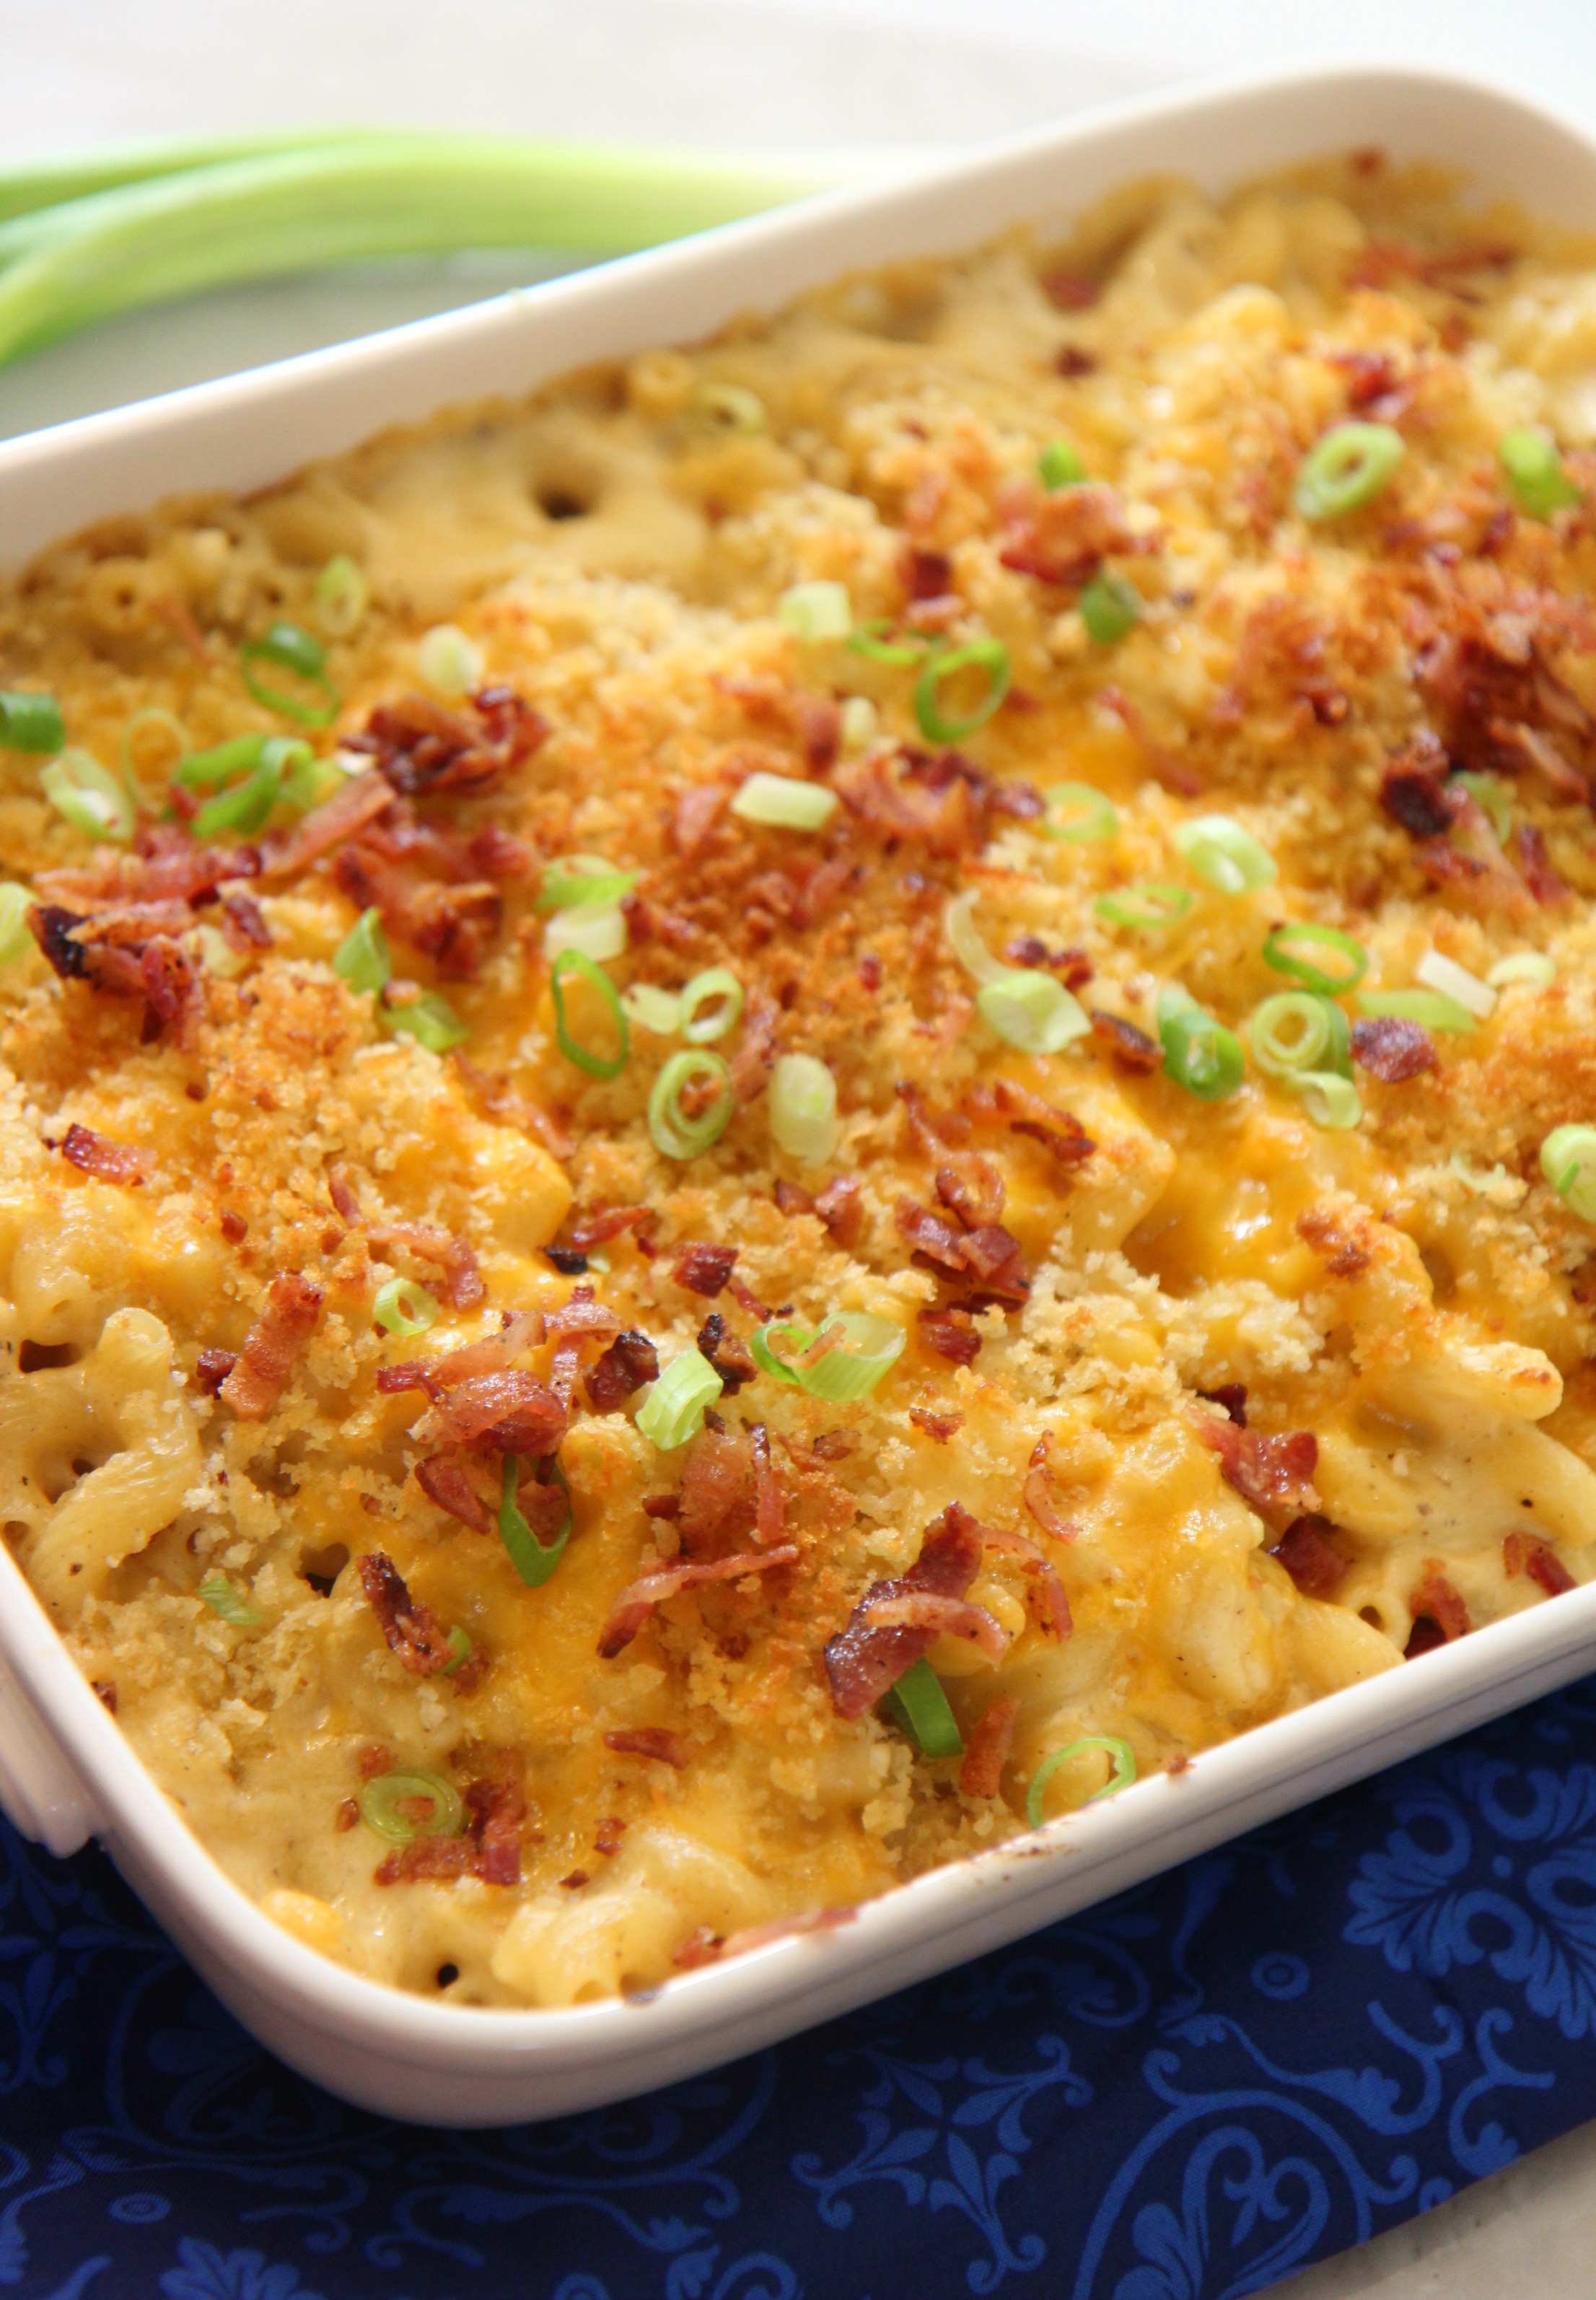 This mac and cheese is exploding with flavor from the bacon cooked through the cheese sauce.